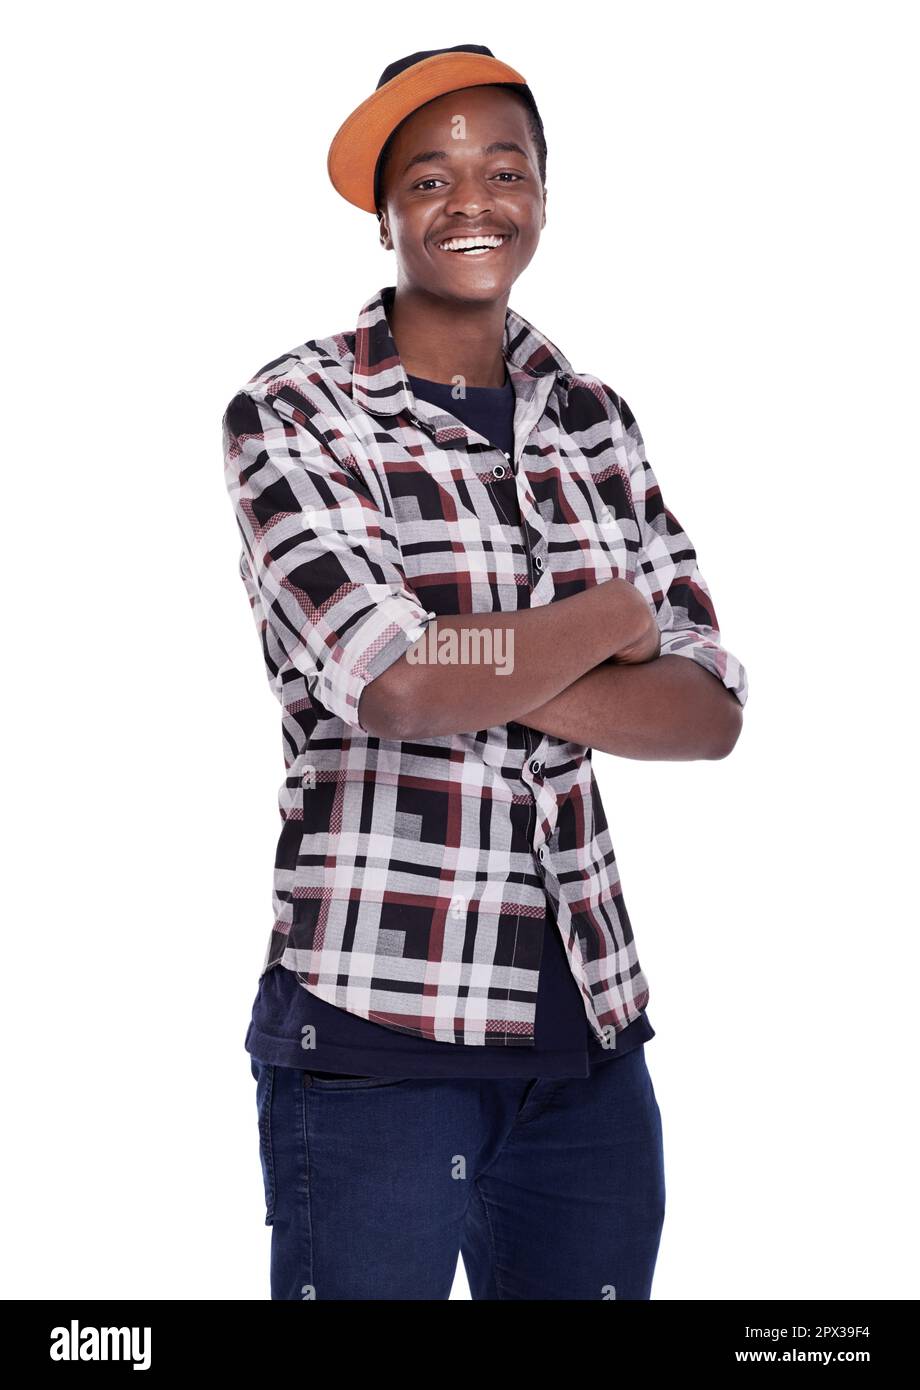 Keeping things trendy and fun. A laughing young african guy standing against a white background. Stock Photo